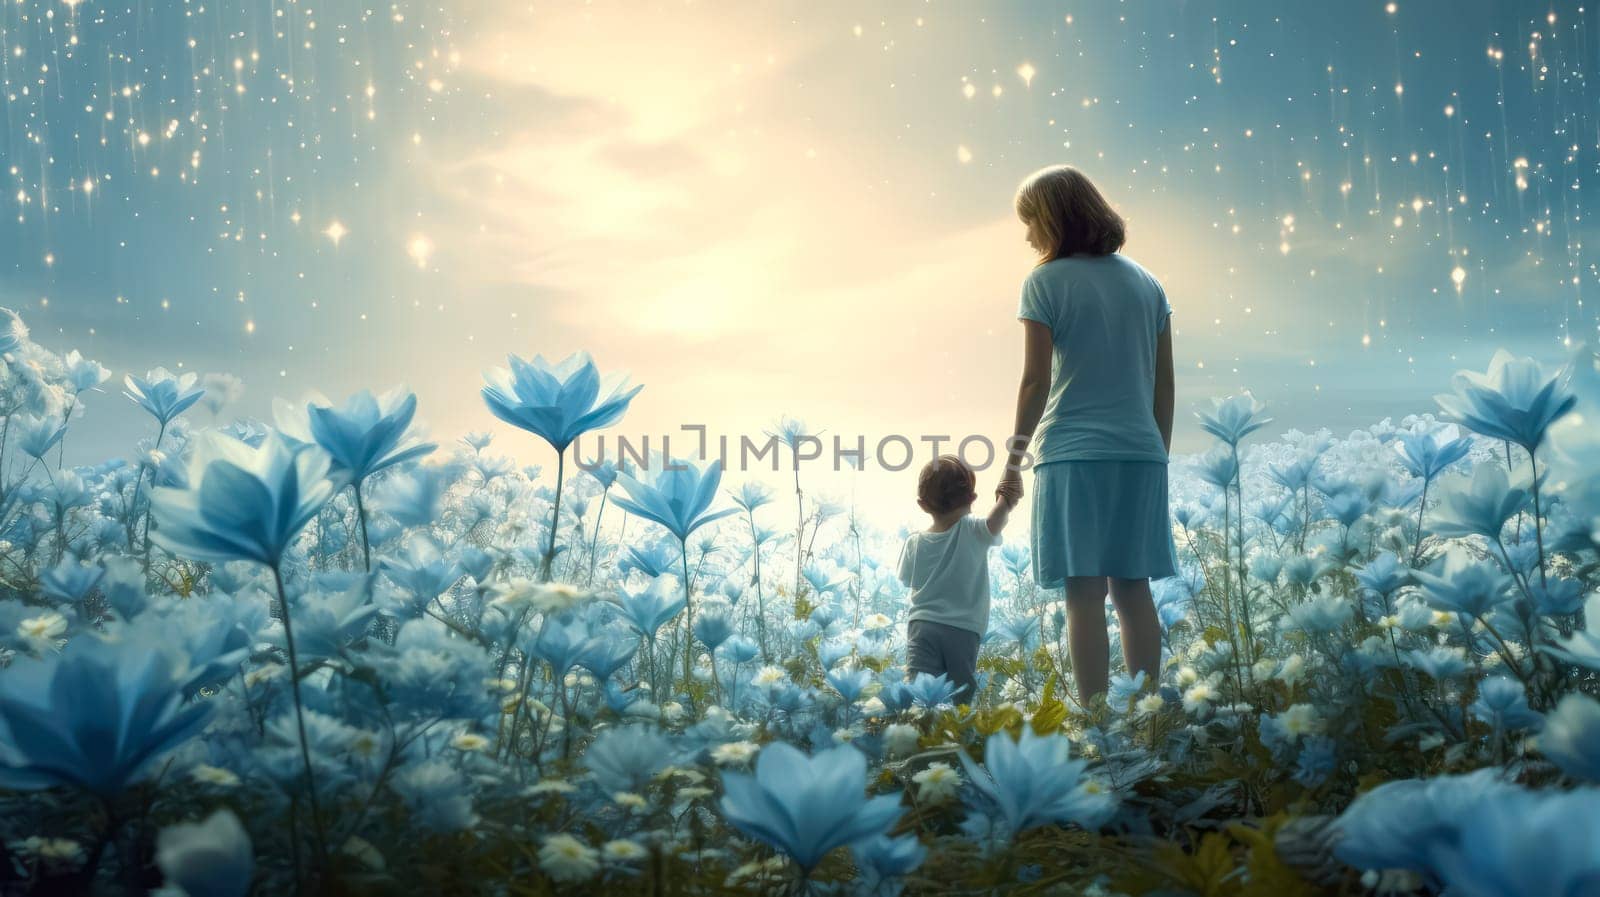 A woman and a child are standing in a field of blue flowers by Alla_Morozova93